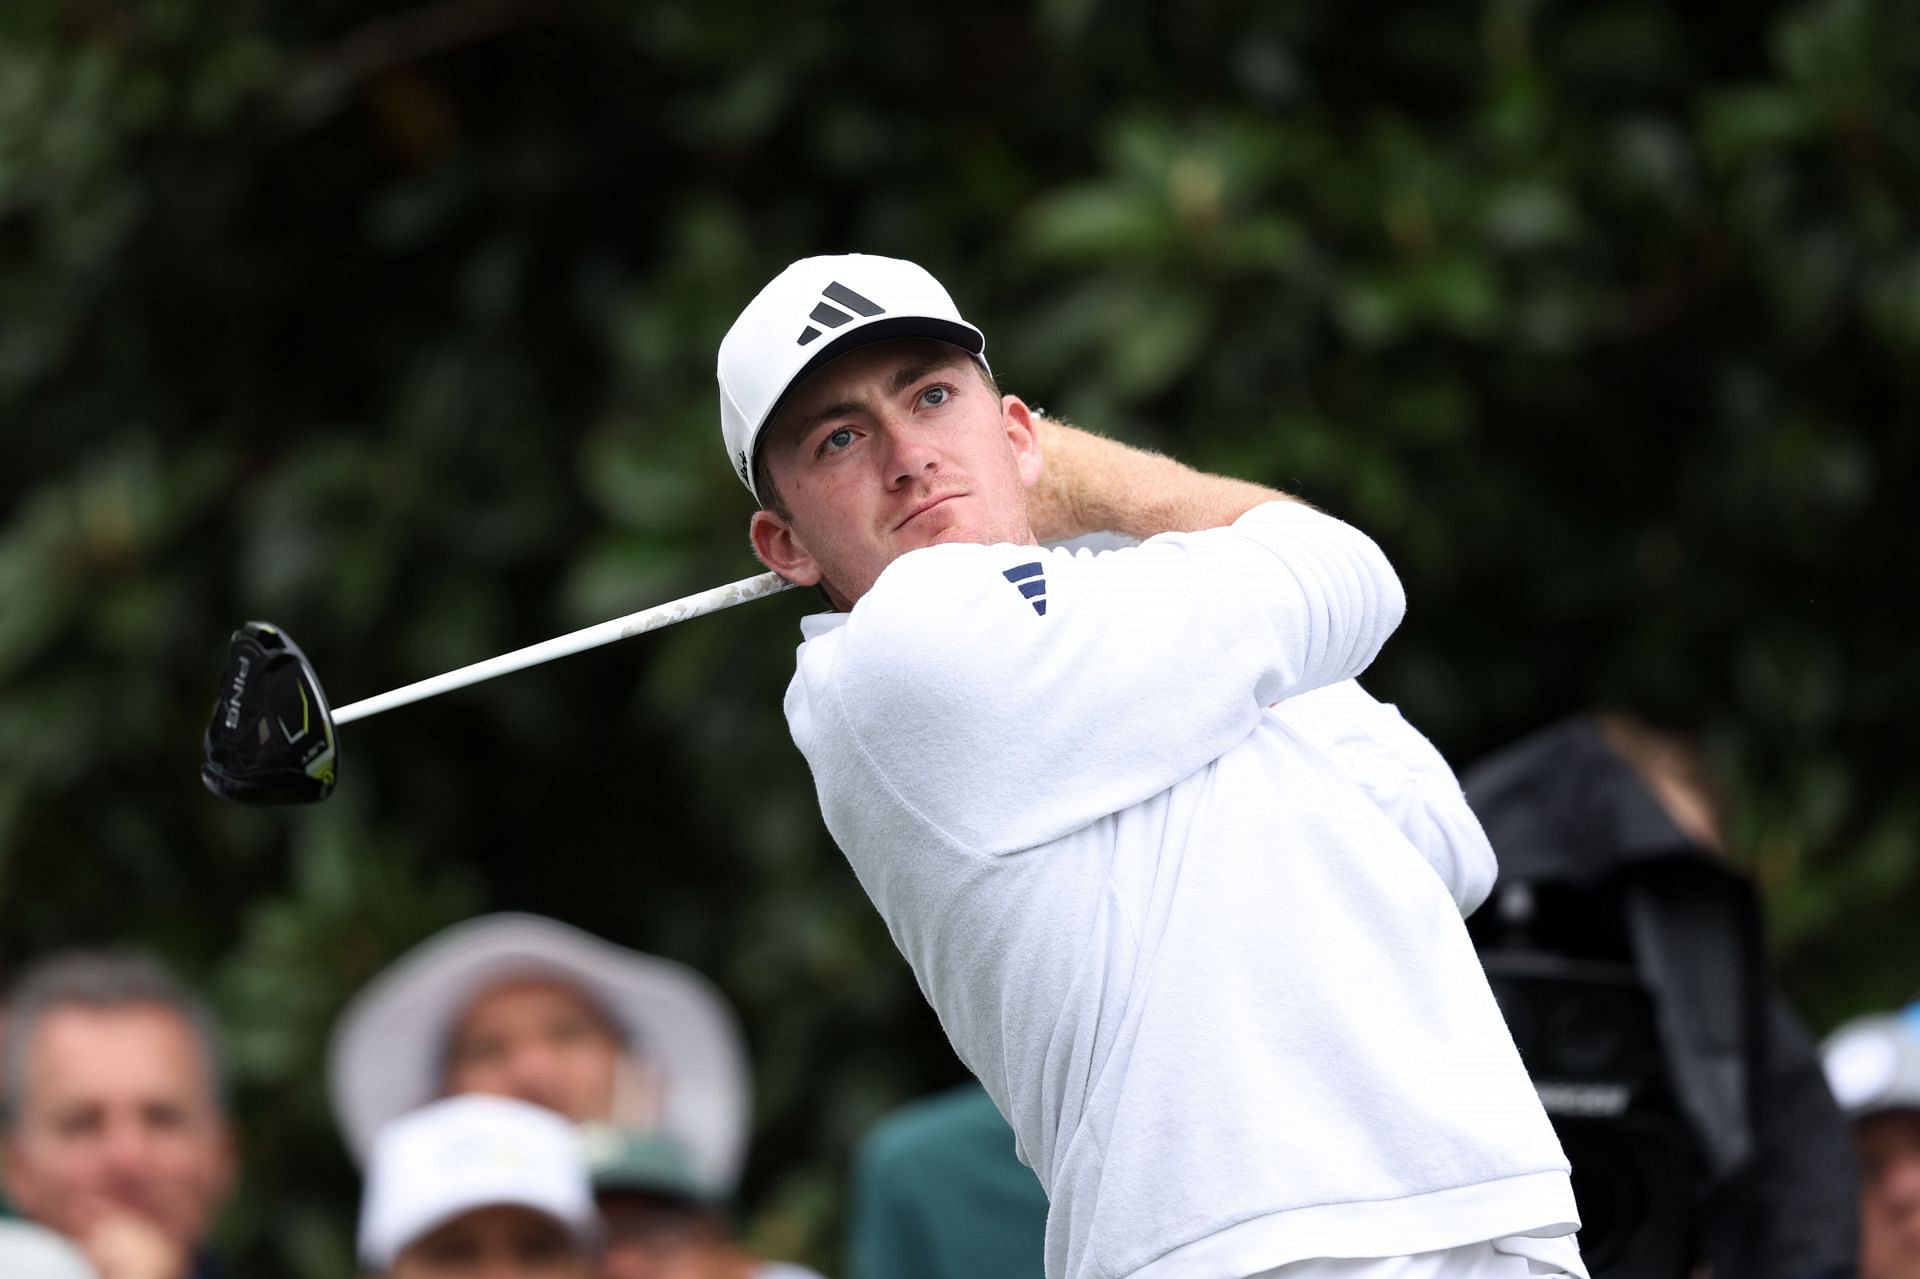 Nick Dunlap has long odds of winning his first Masters